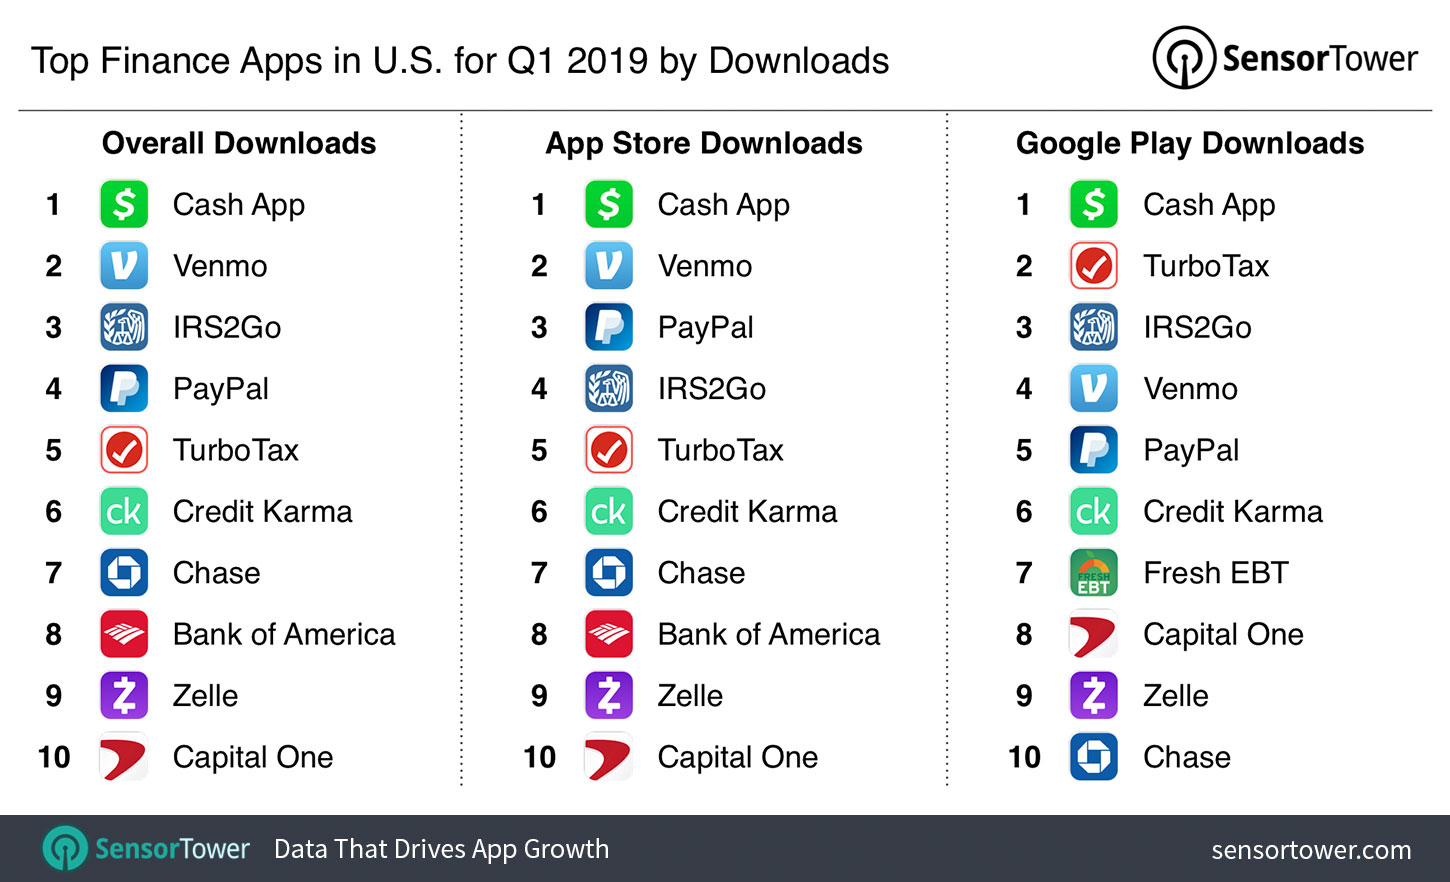 Top Finance Apps in U.S. for Q1 2019 by Downloads